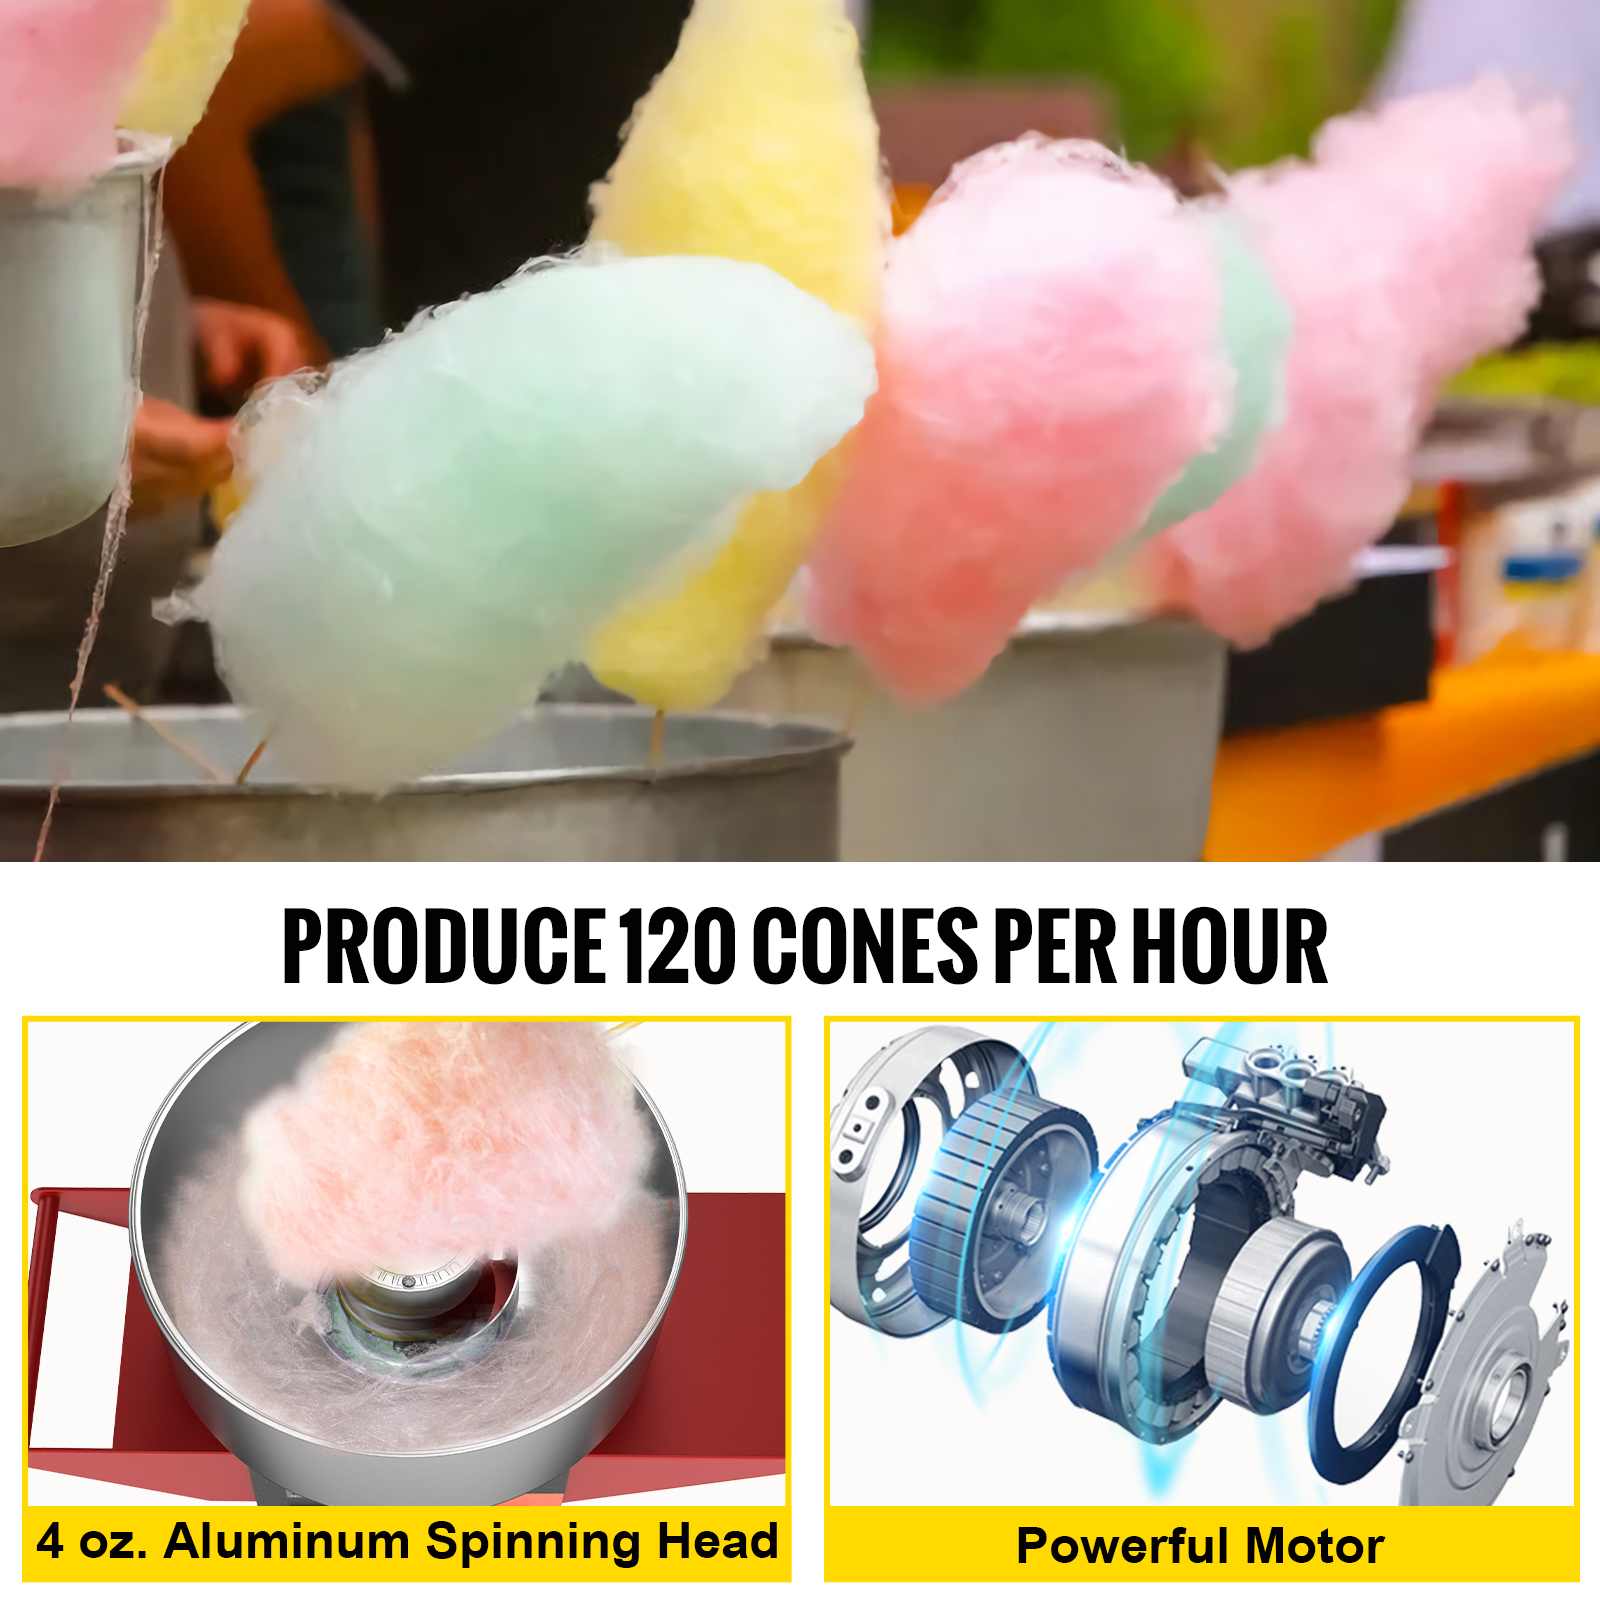 Kacsoo Cotton Candy Machine,Cotton Candy Floss Maker Machine,Electric Cotton Candy Maker Candy Floss Machine,Candy Floss Machine Electric Cotton Candy Maker for Kitchen DIY Children Christmas Xmas 